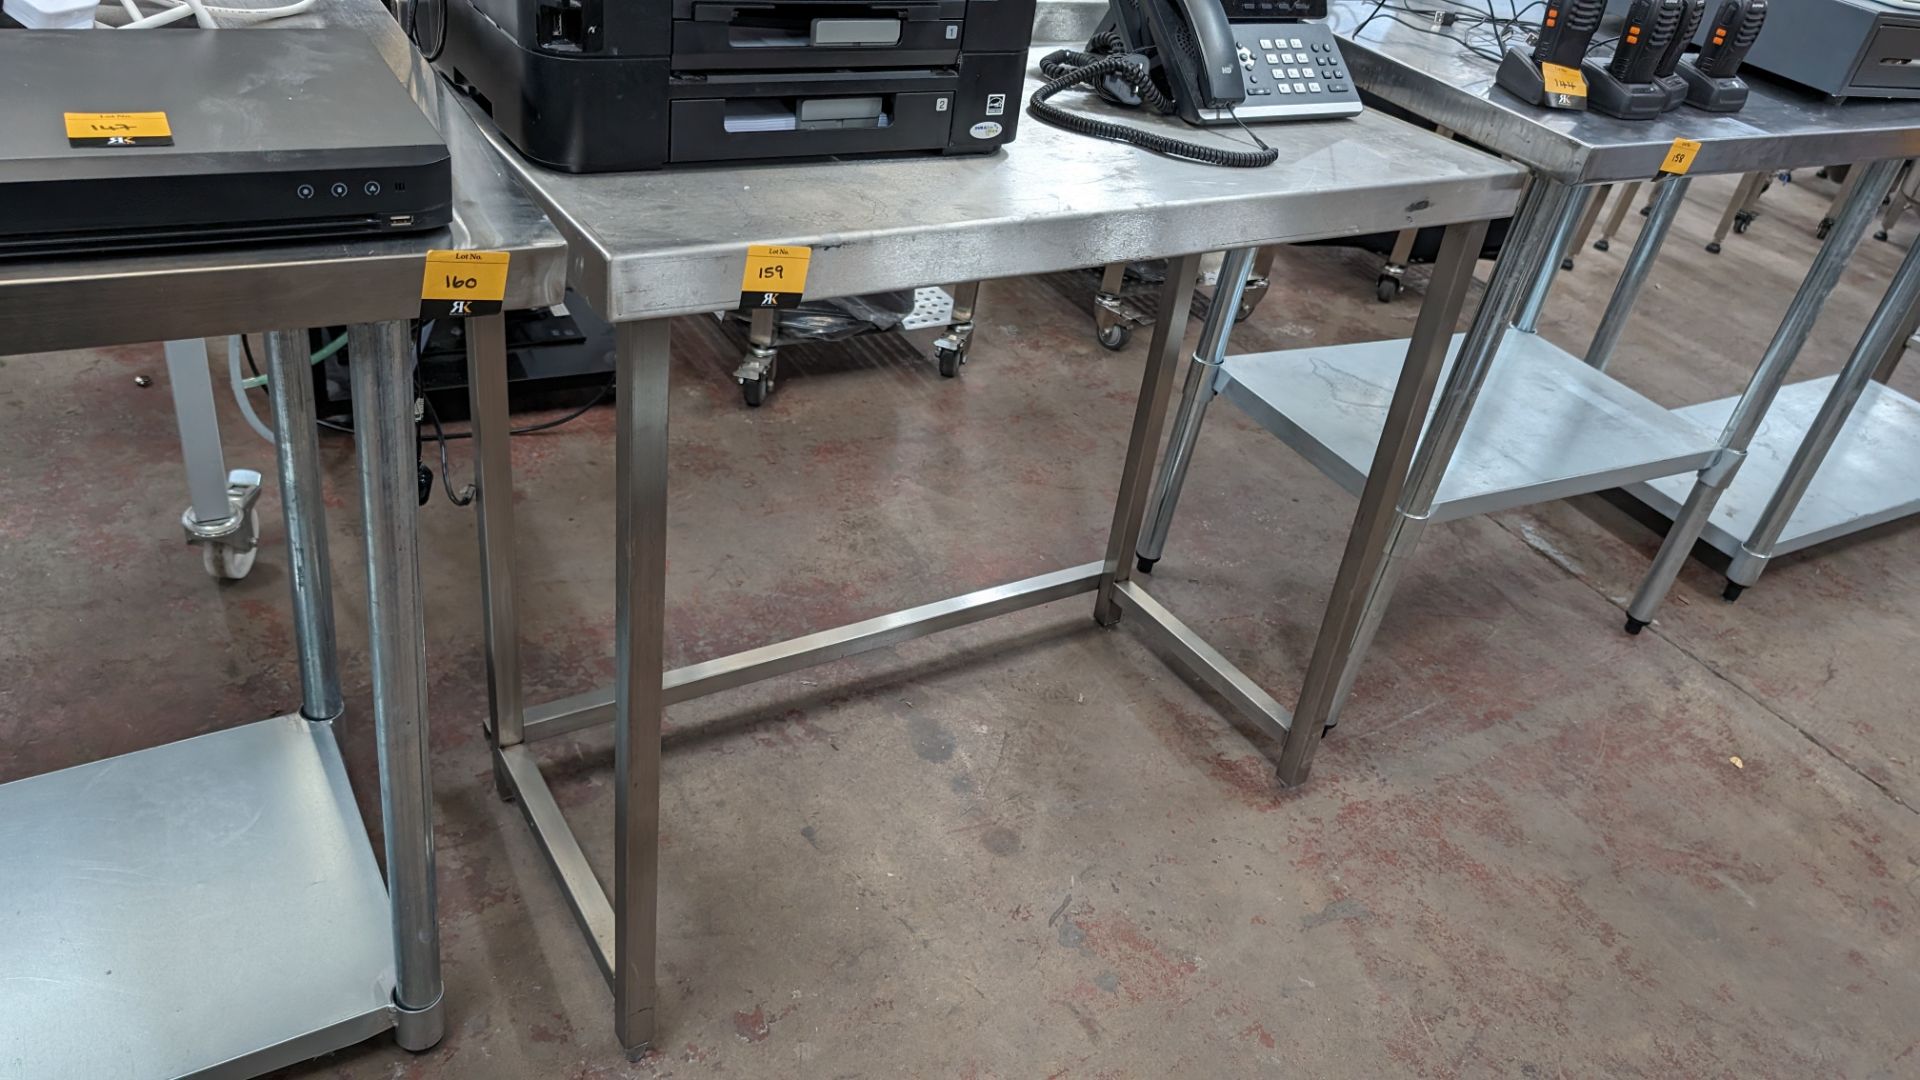 Stainless steel table with upstand at rear, max dimensions: 870mm x 535mm x 970mm - Image 3 of 3